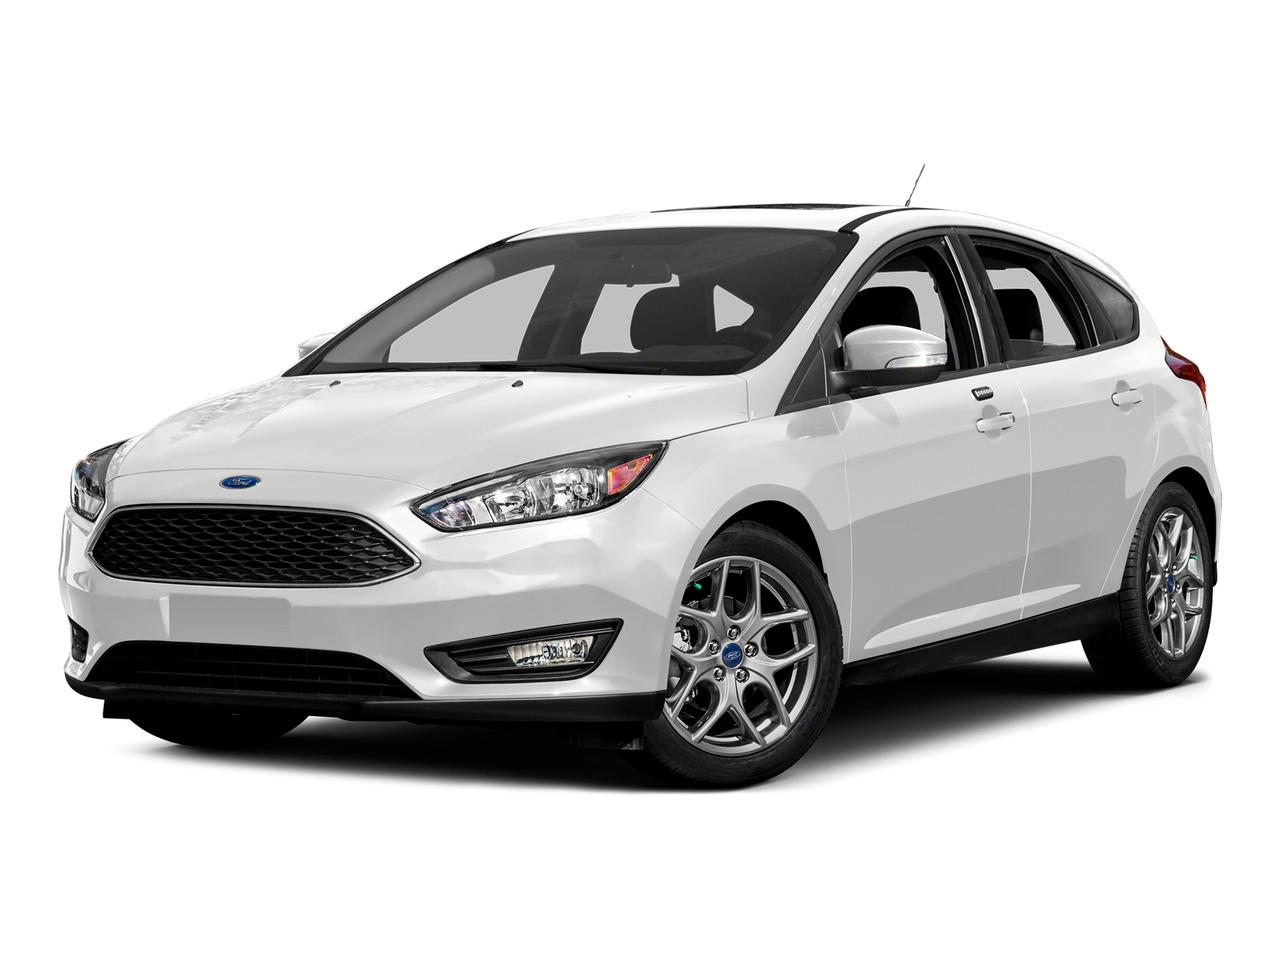 2015 Ford Focus Vehicle Photo in Langhorne, PA 19047